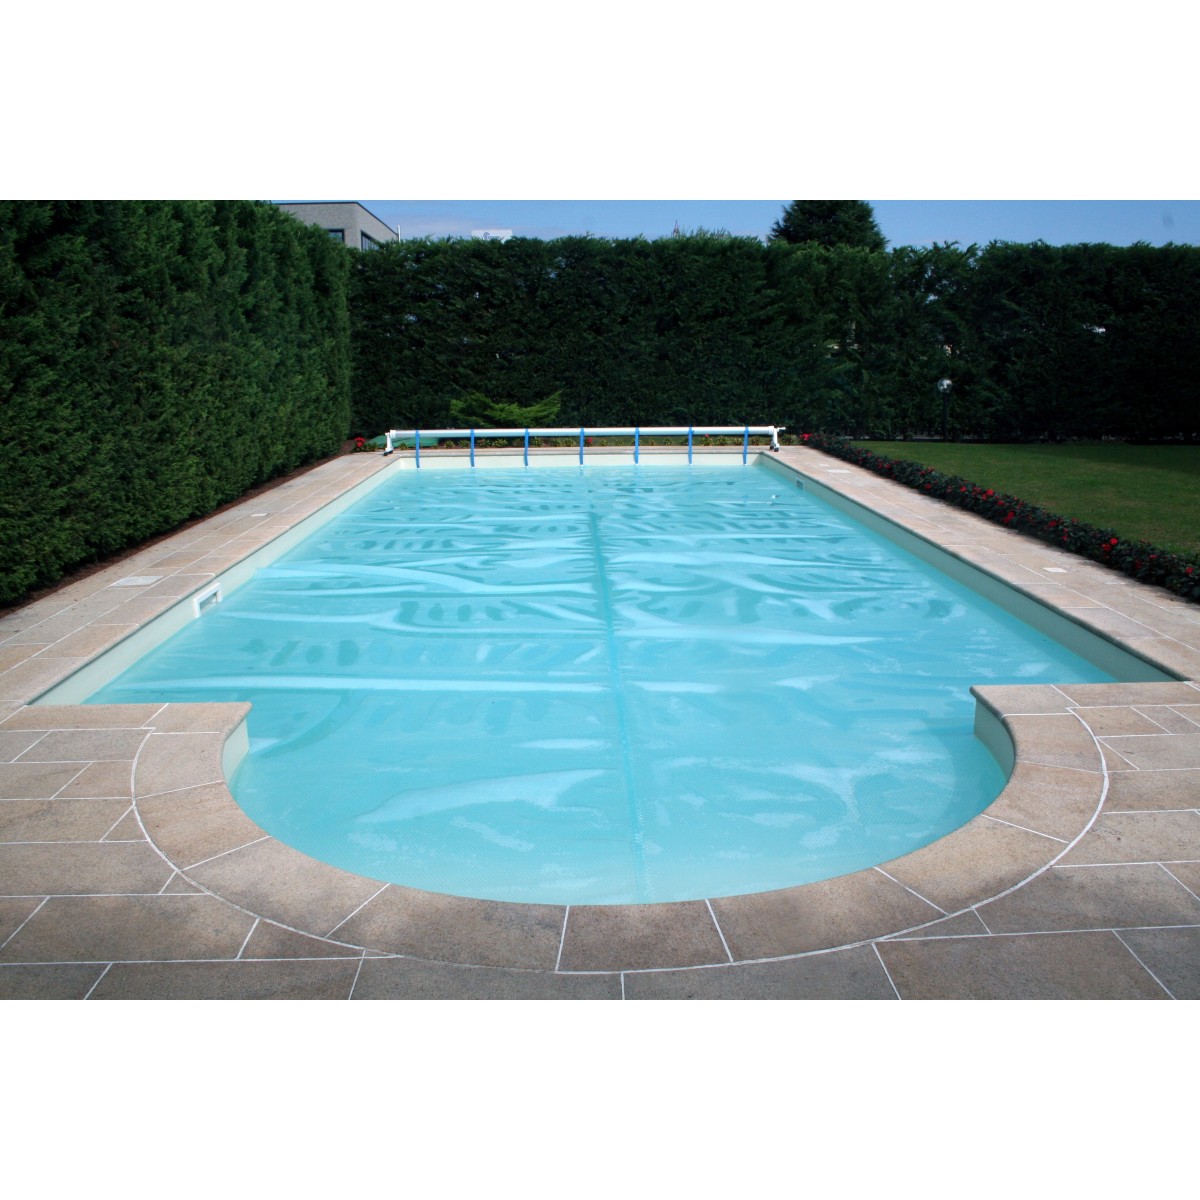 Isothermal cover Sunguard De Lux - size 5x11